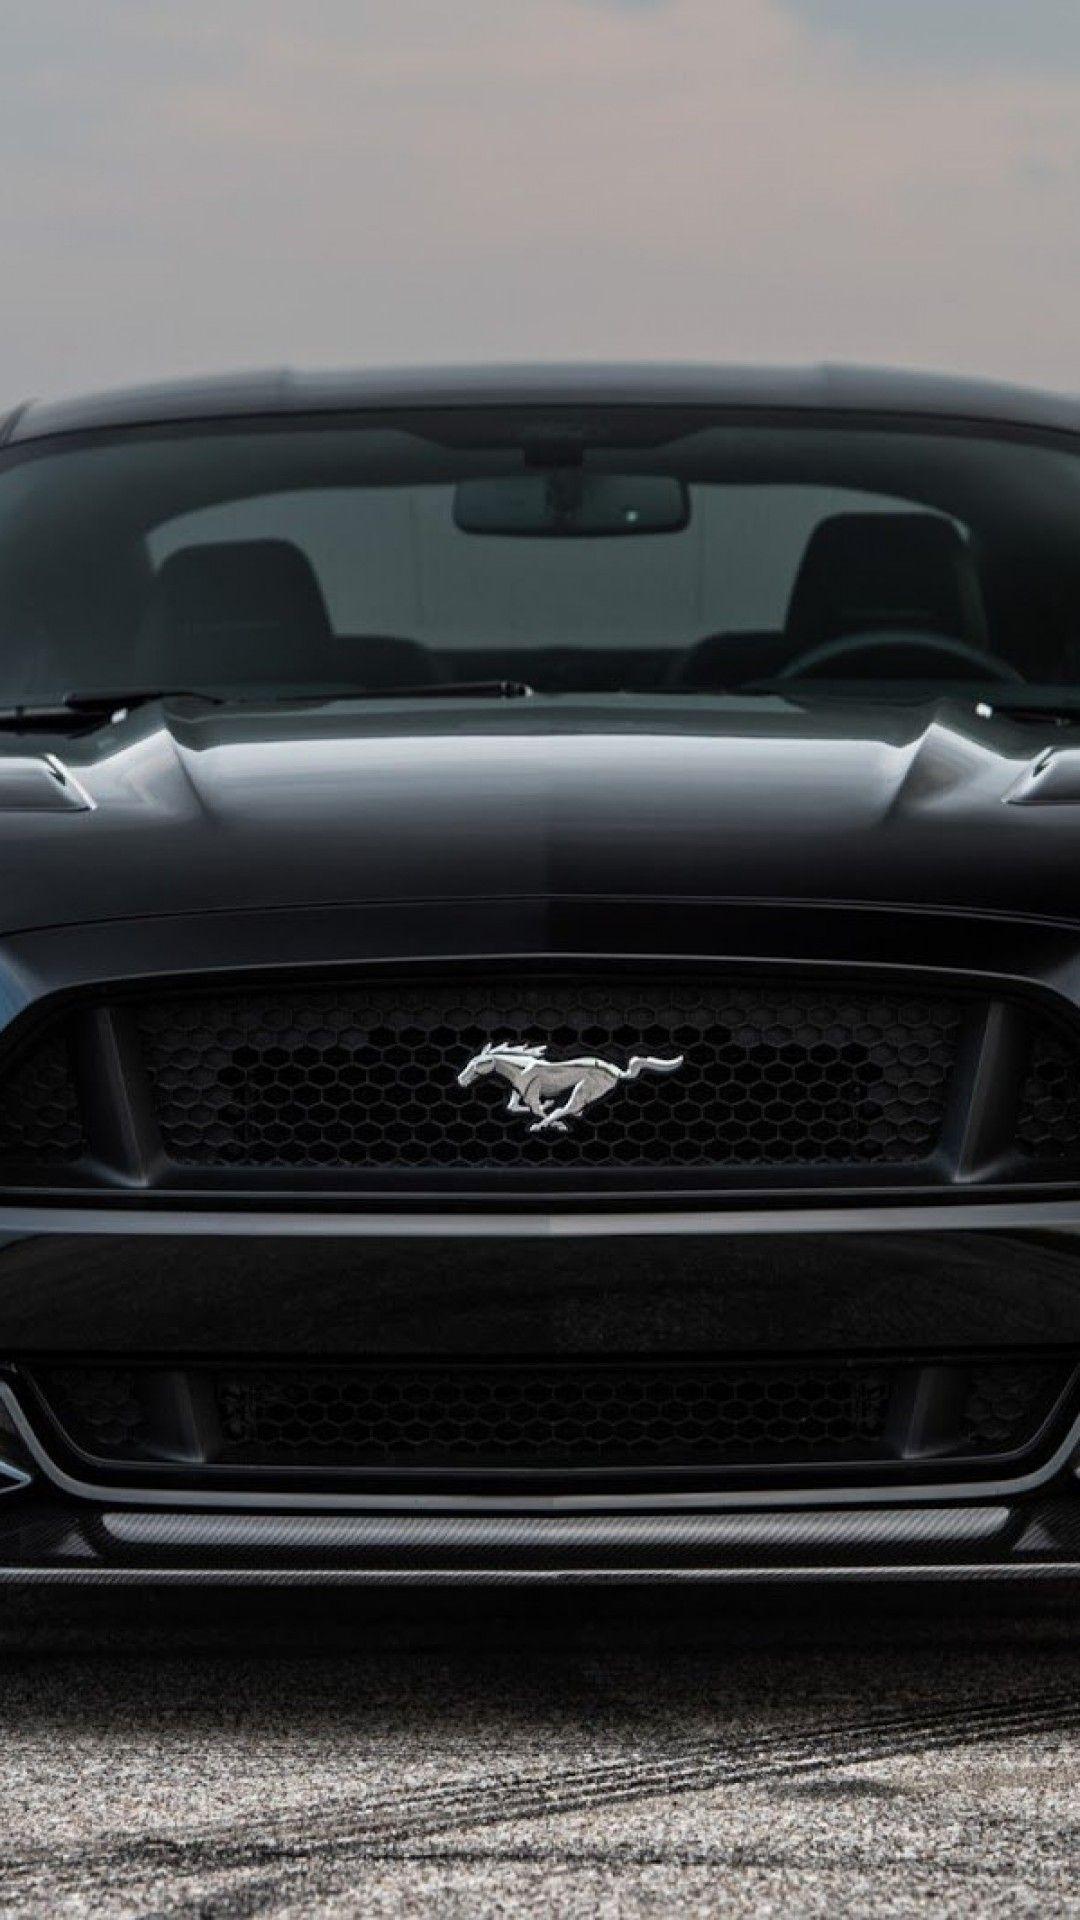 Ford Mustang Logo Wallpaper iPhone. Gallery Of Ford Mustang Shelby